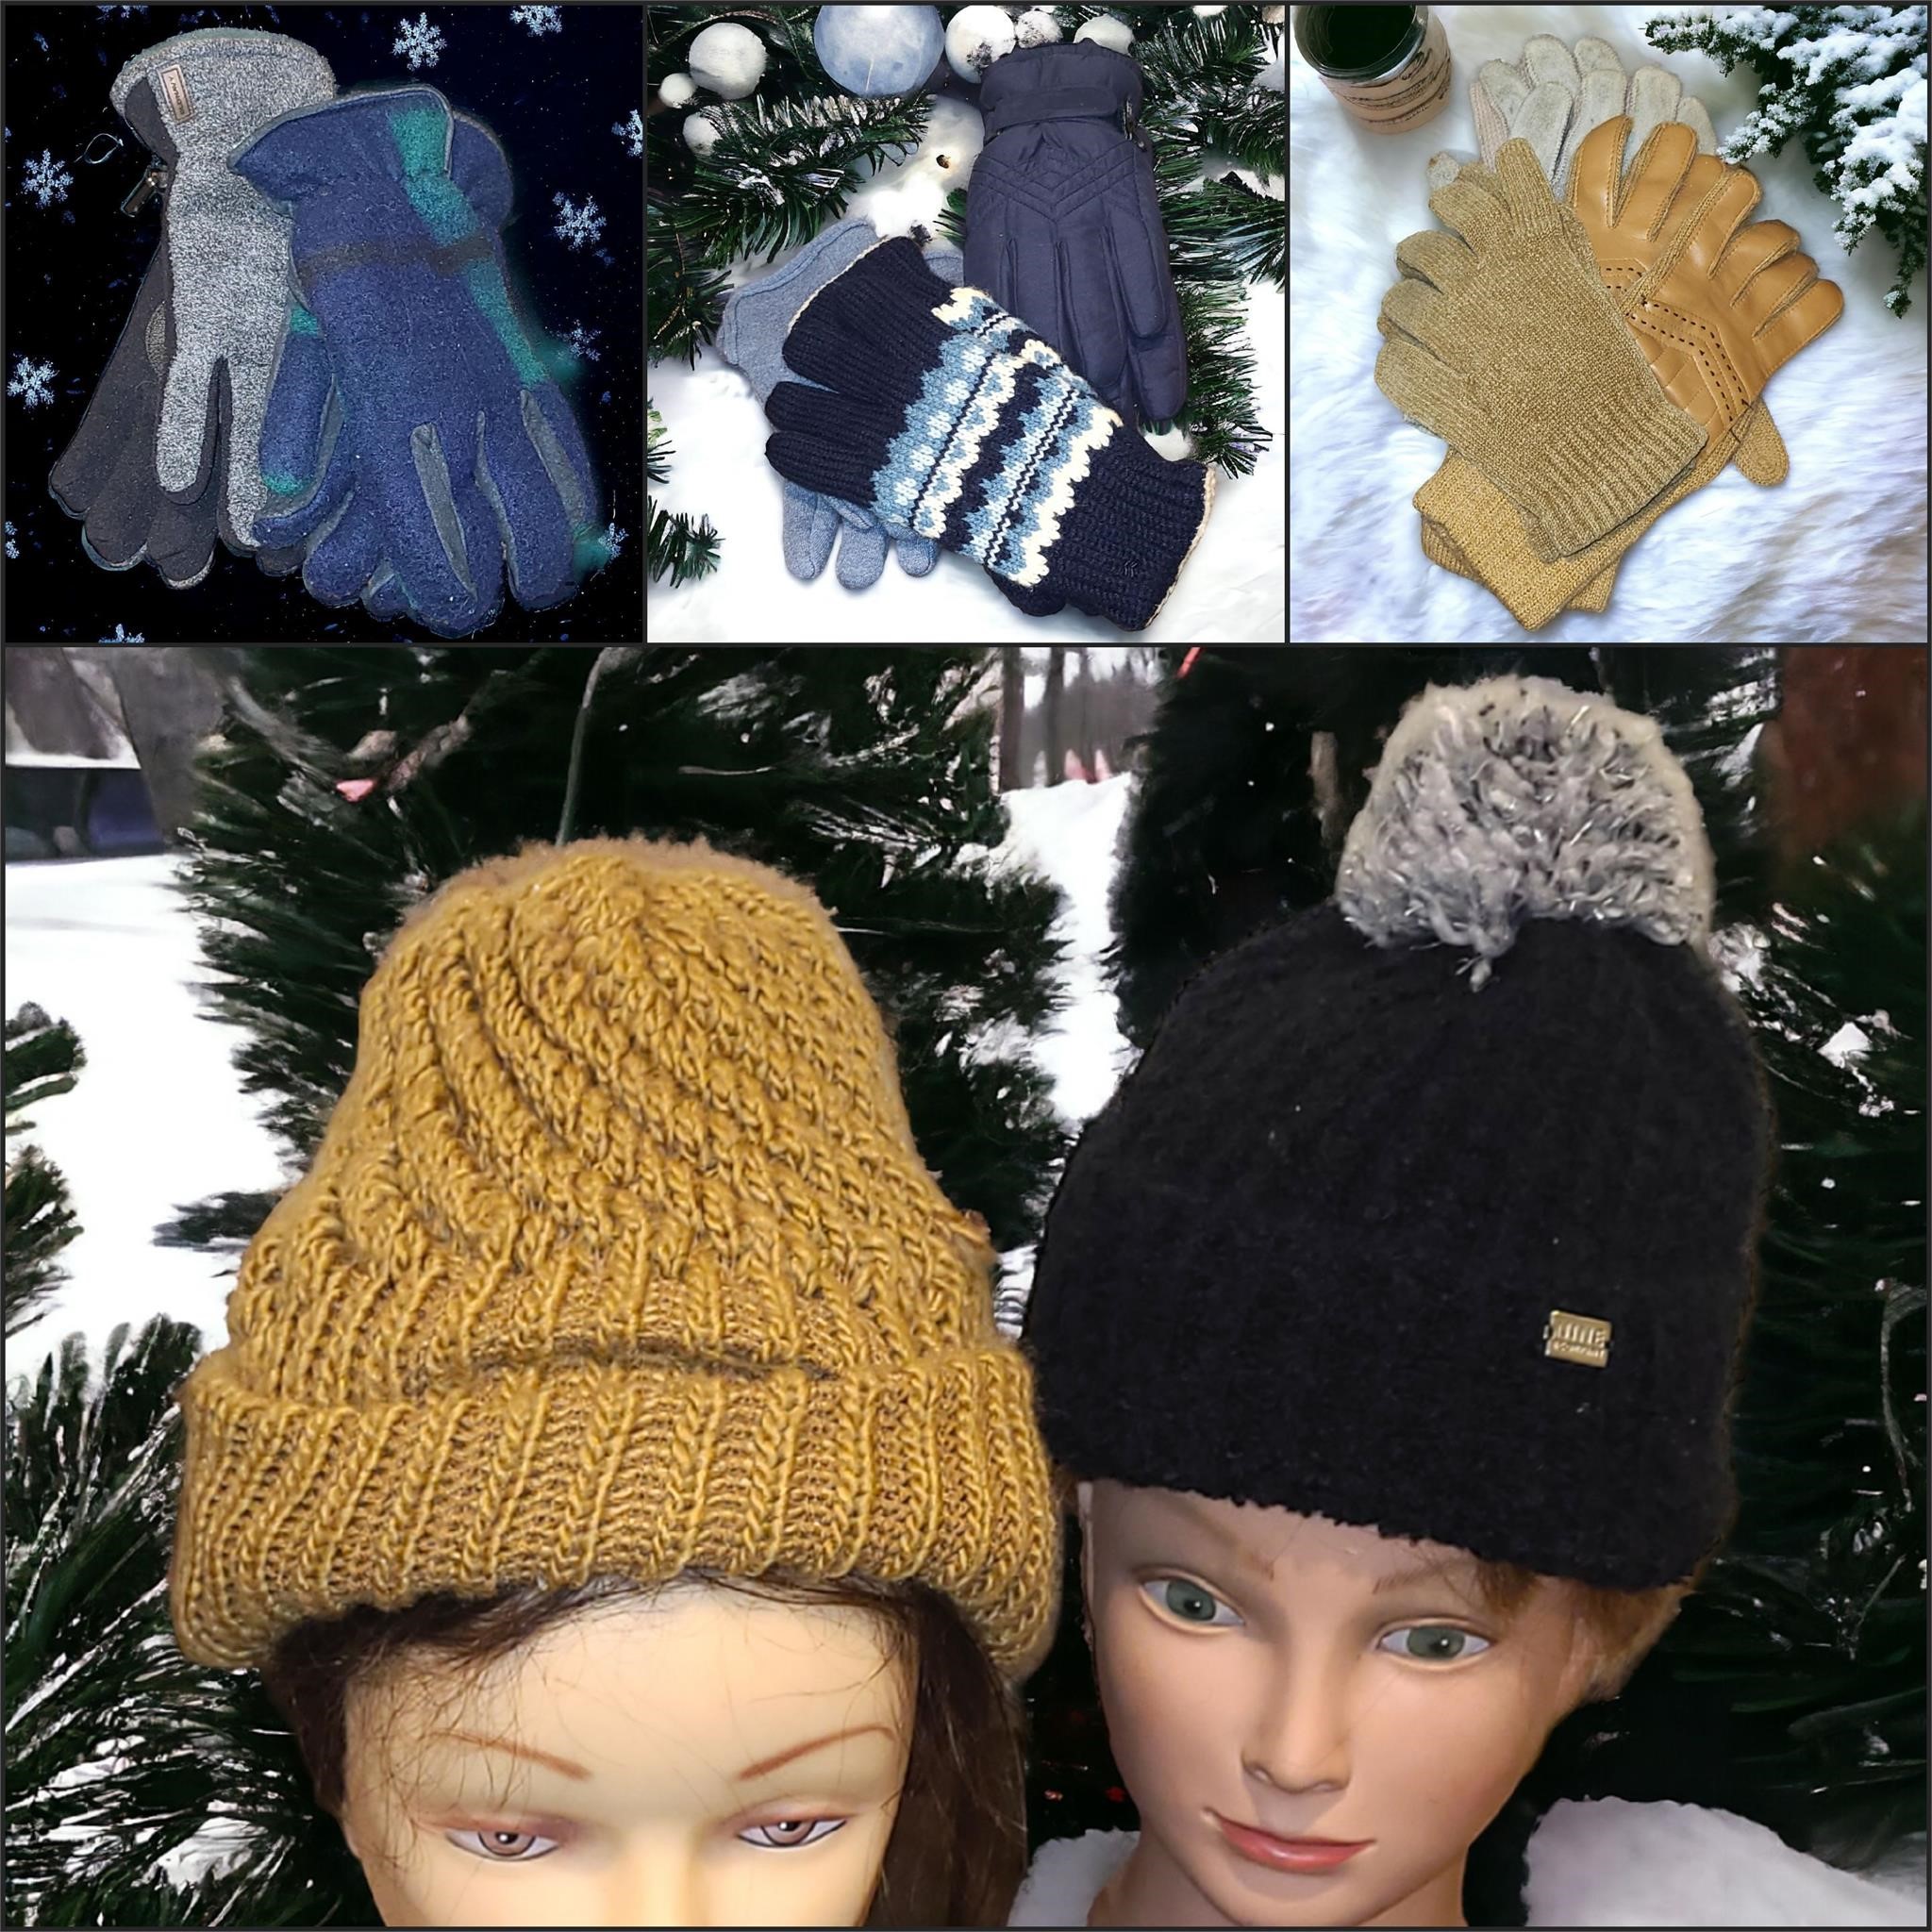 Lot of Gloves and Crochet Beanies